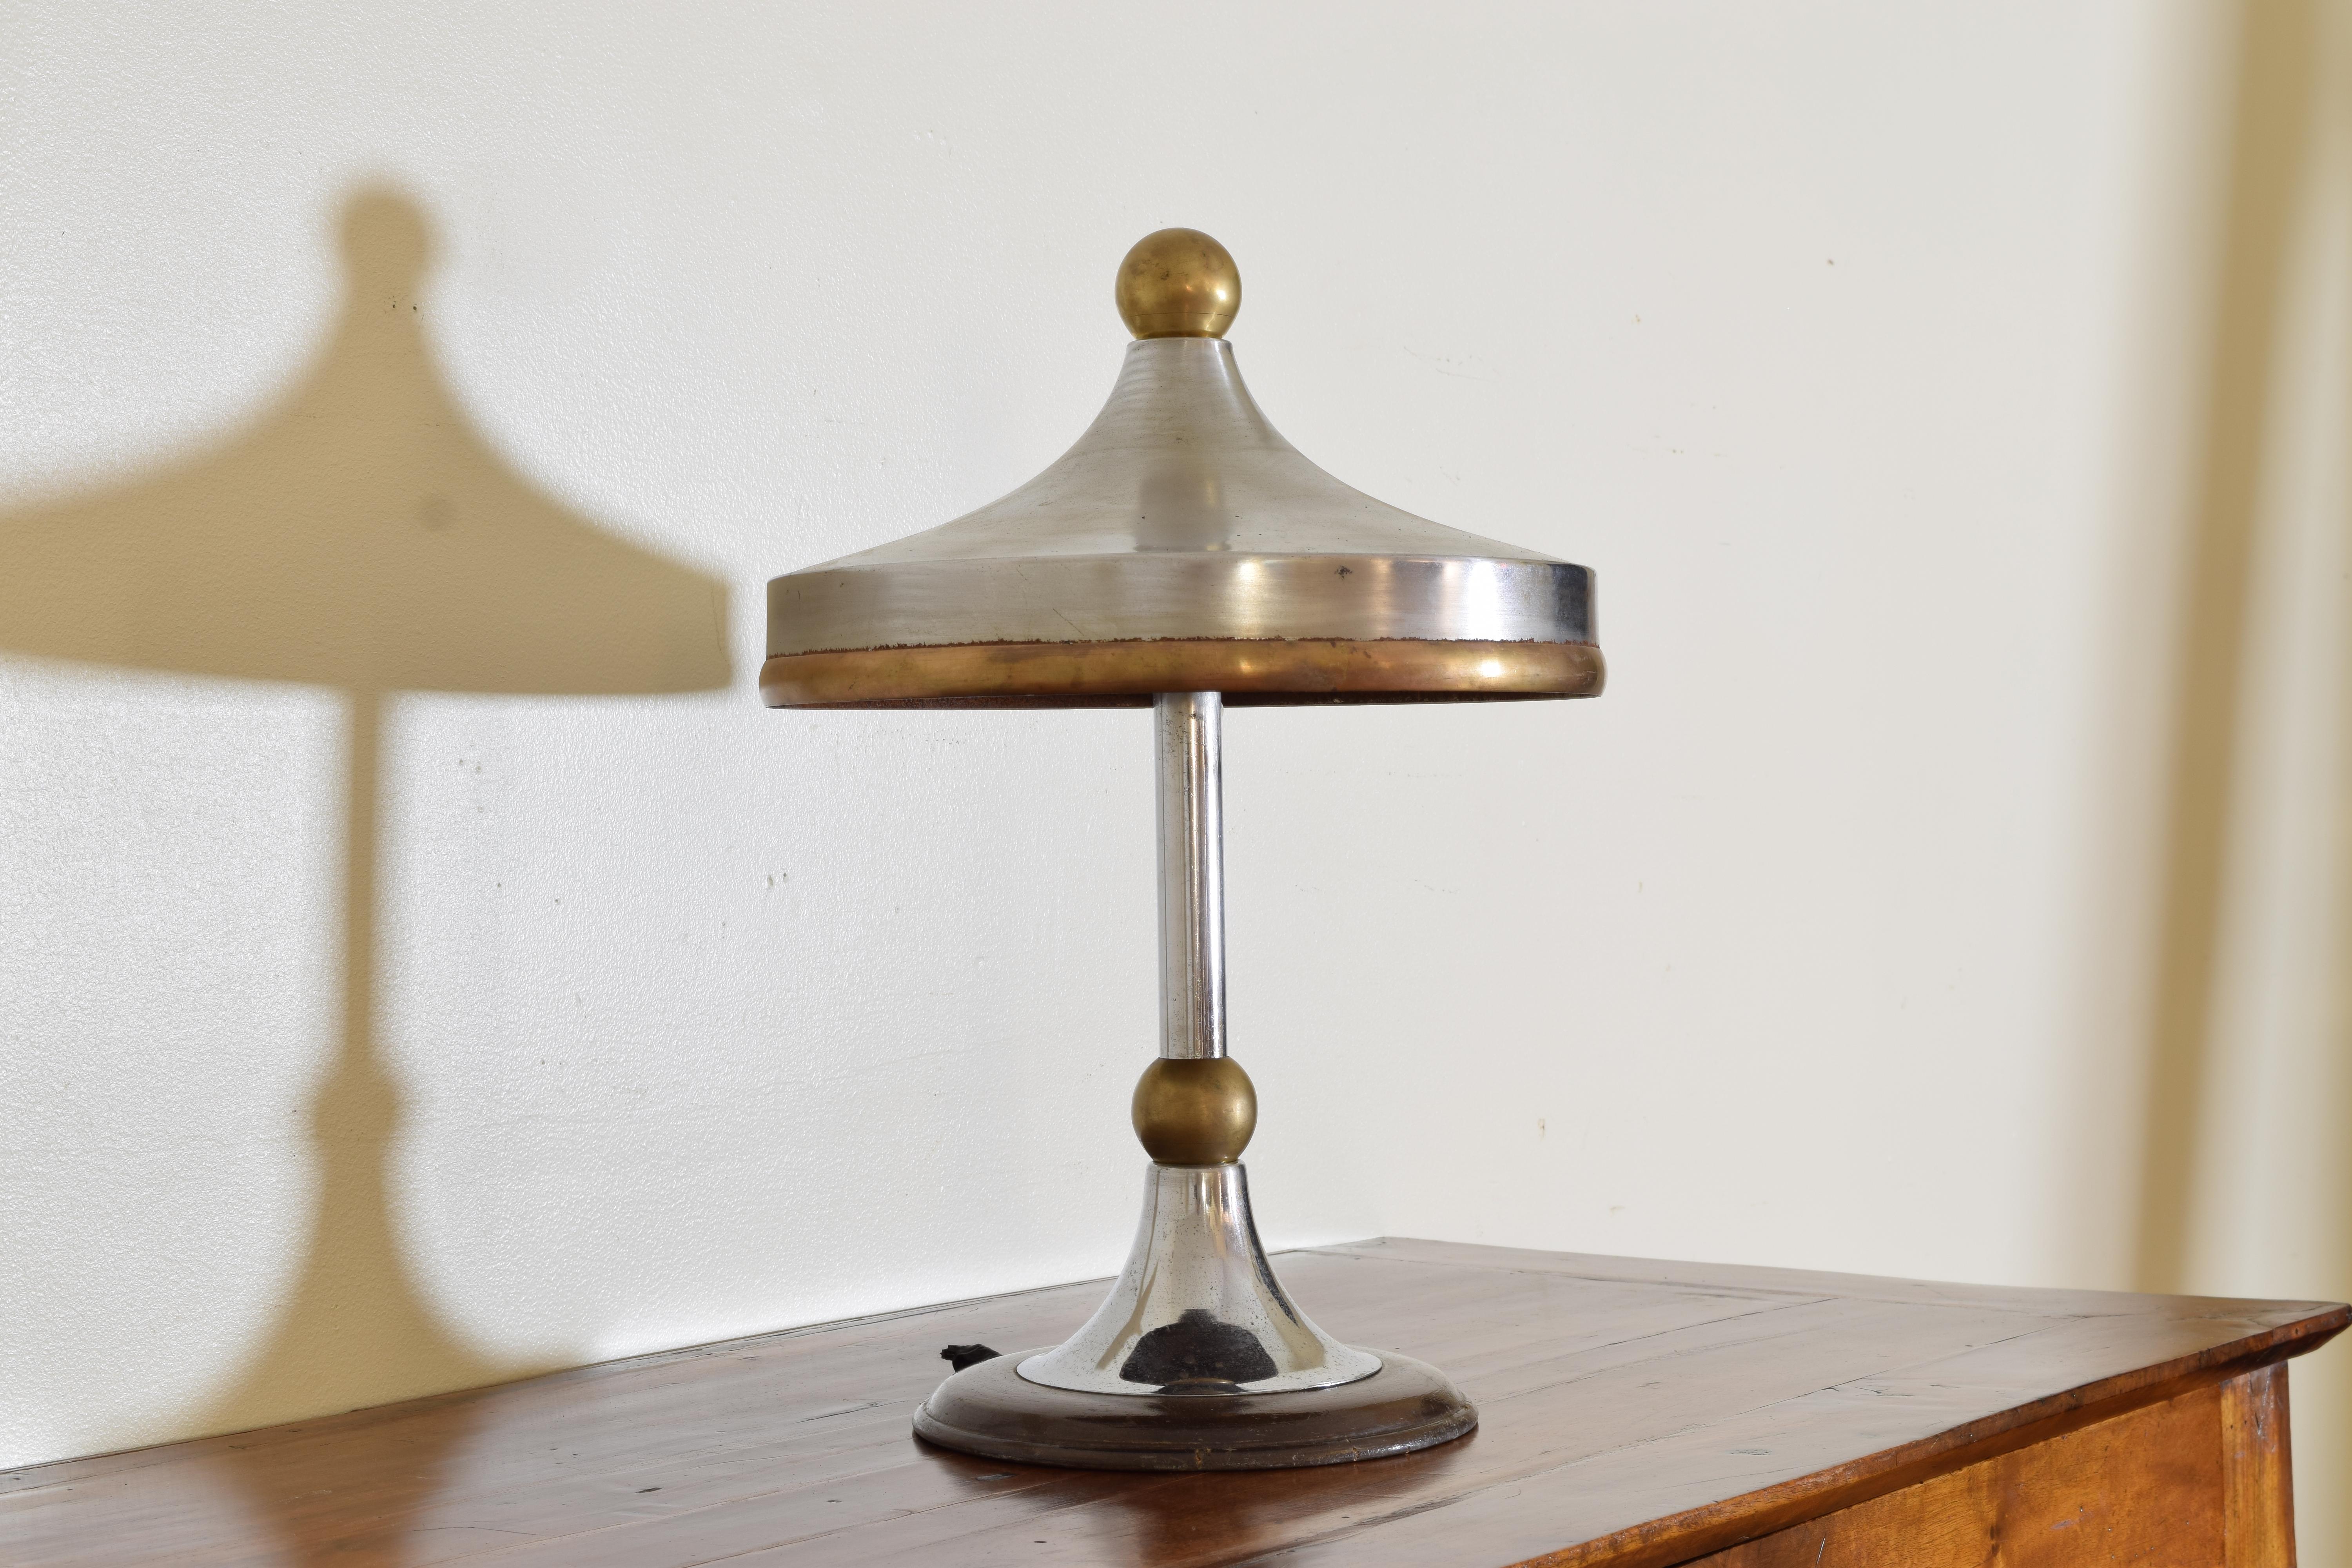 Italian Mid Century Modern Chrome and Brass Table Lamp, early 2nd half 20th cen. In Good Condition For Sale In Atlanta, GA